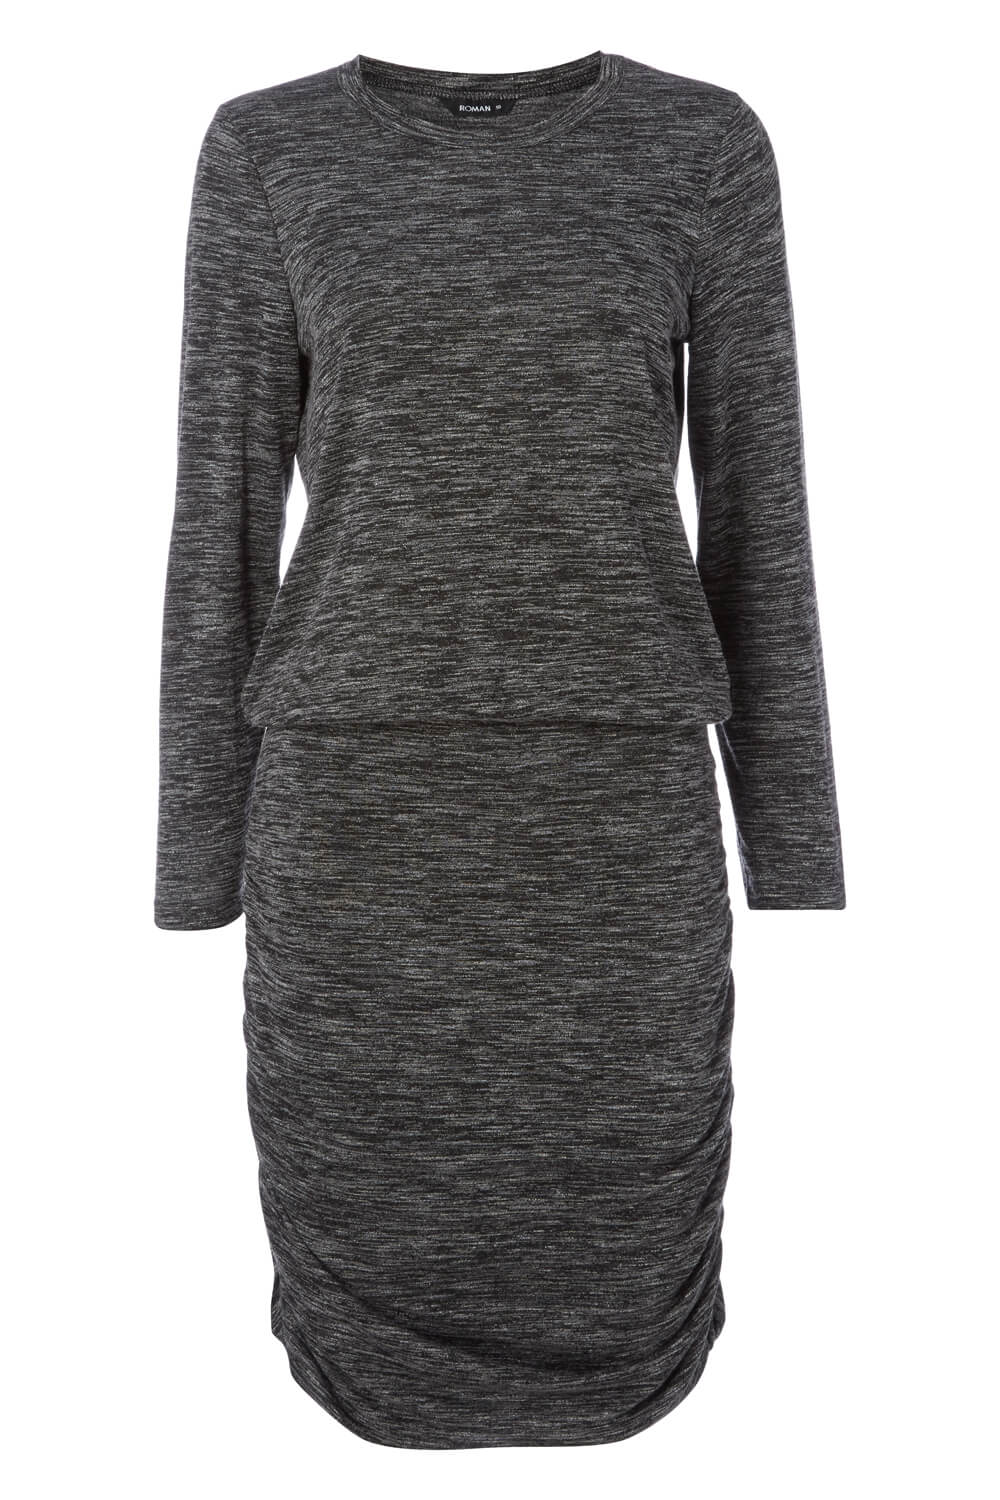 Mottled Grey Ruched Long Sleeves Dress, Image 4 of 4